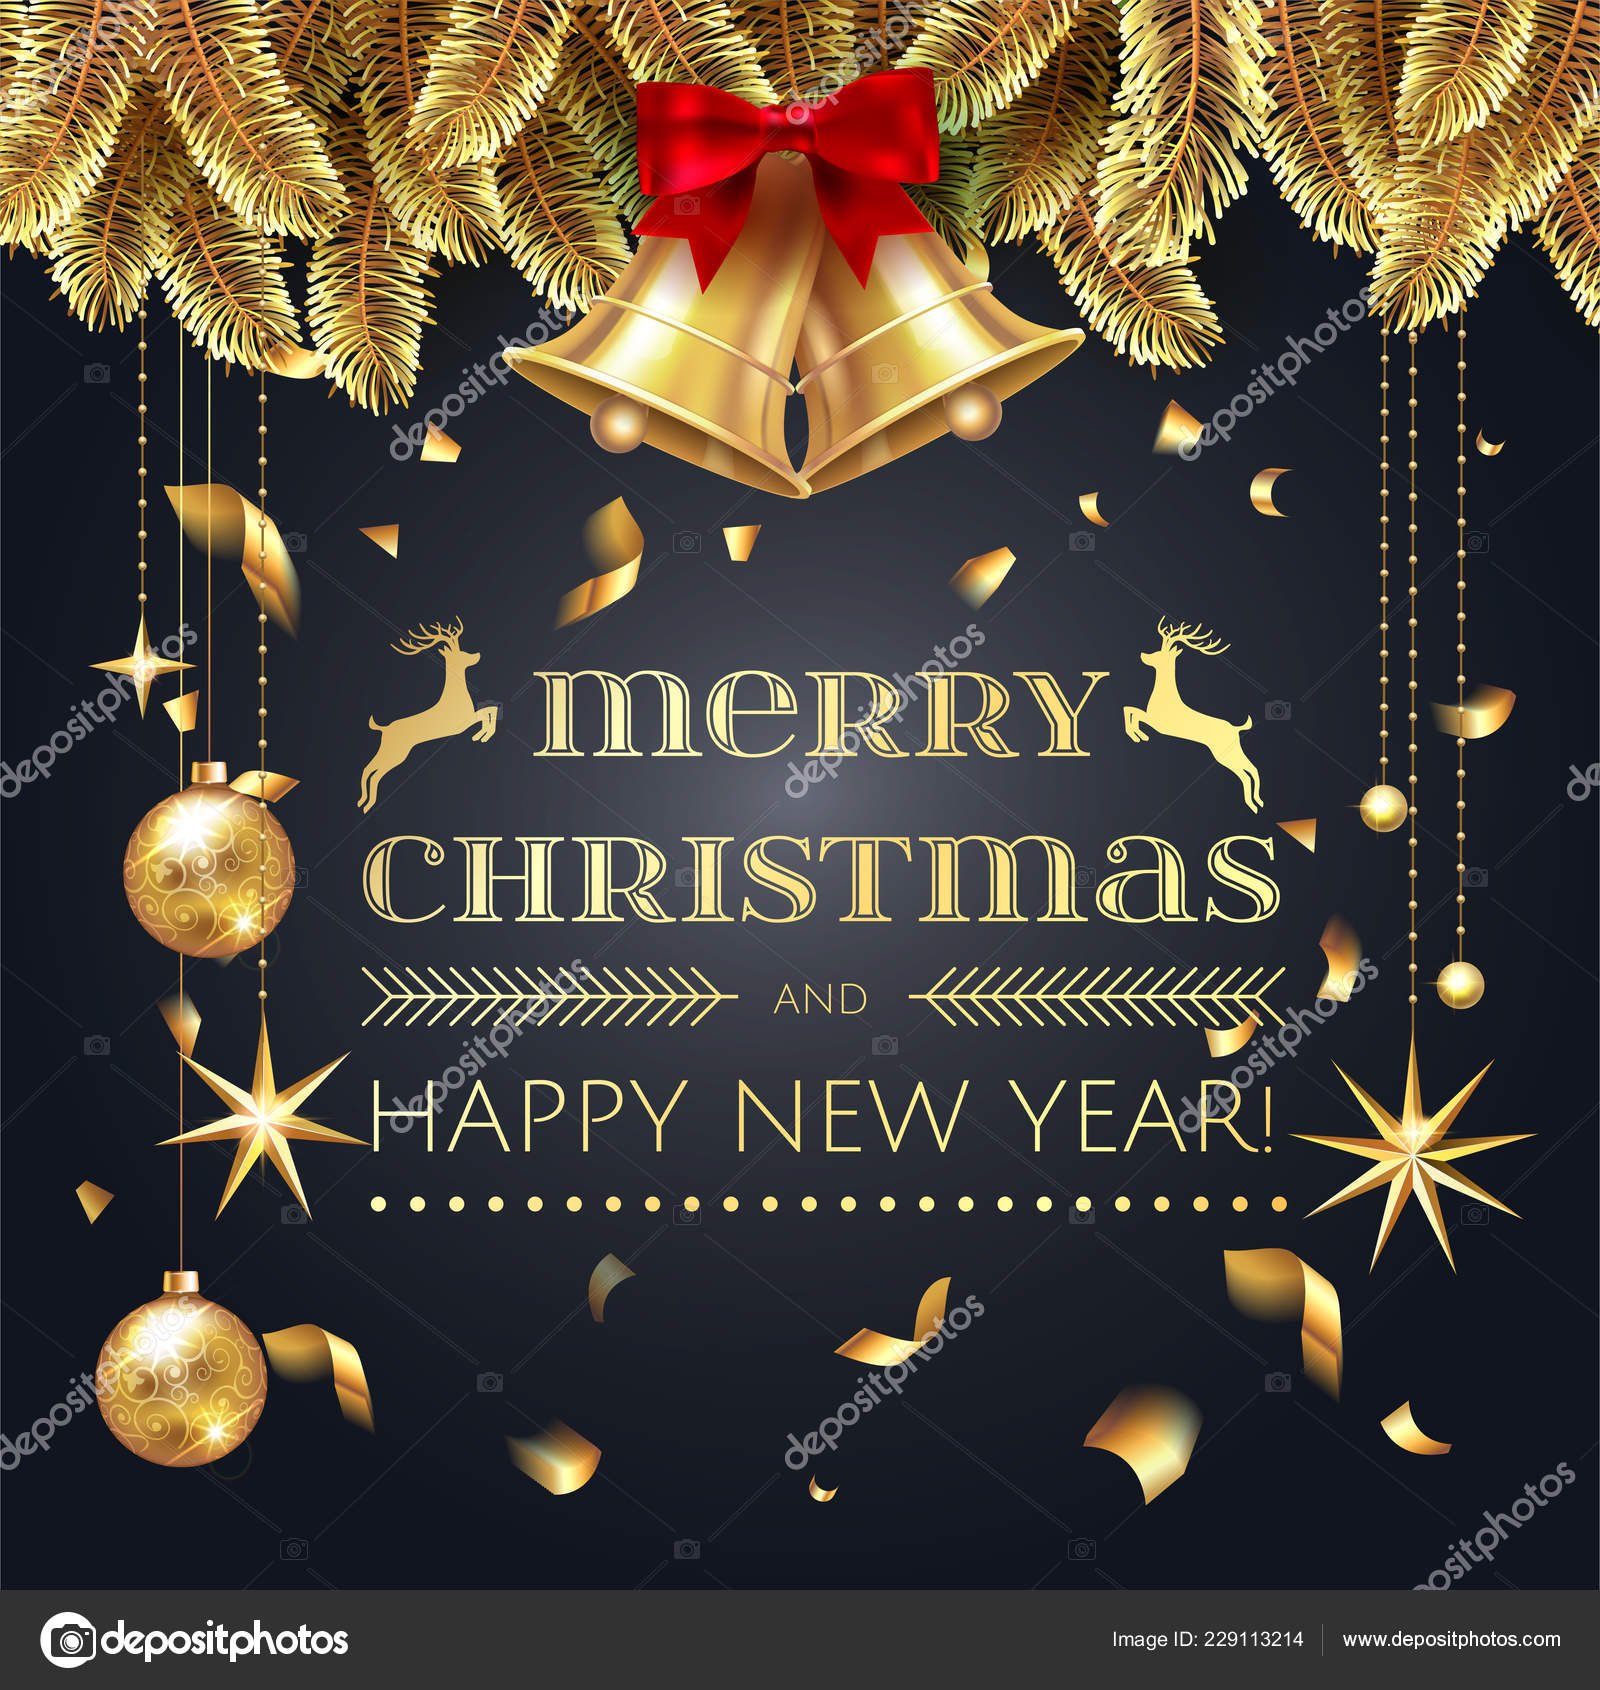 Merry Christmas Happy New Year Stock Vector Greeting Card Chrirstmas Vector Image By C Nikelser Vector Stock